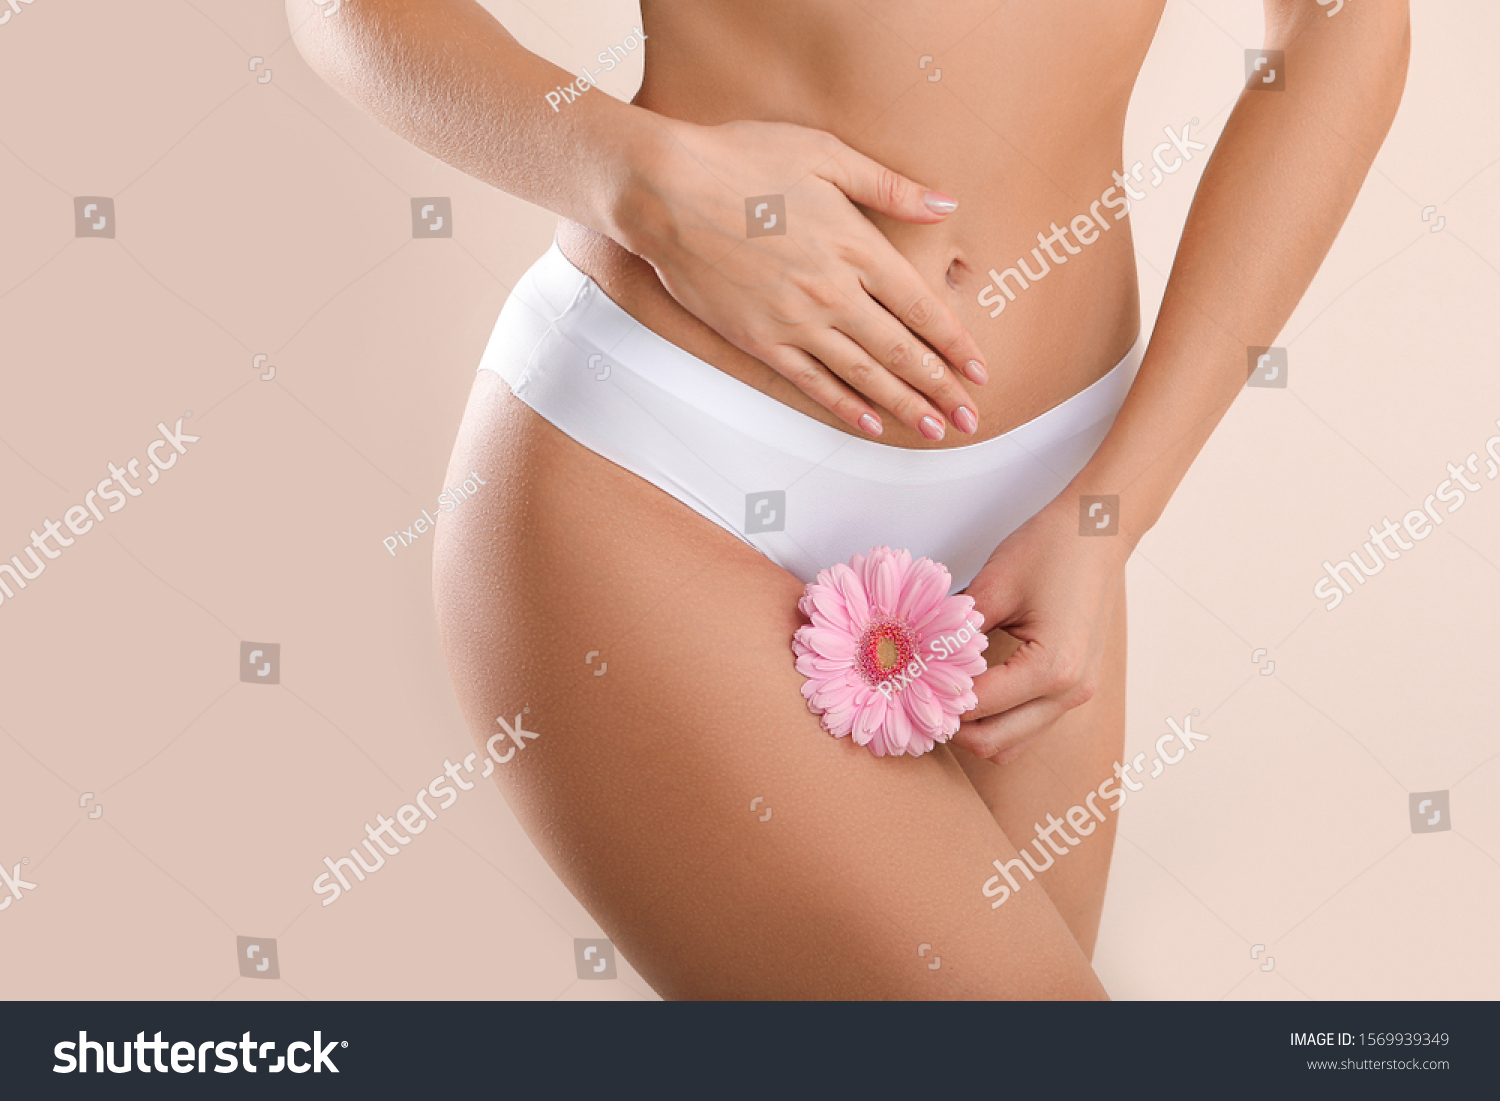 Young woman with flower on light background. Gynecology concept #1569939349